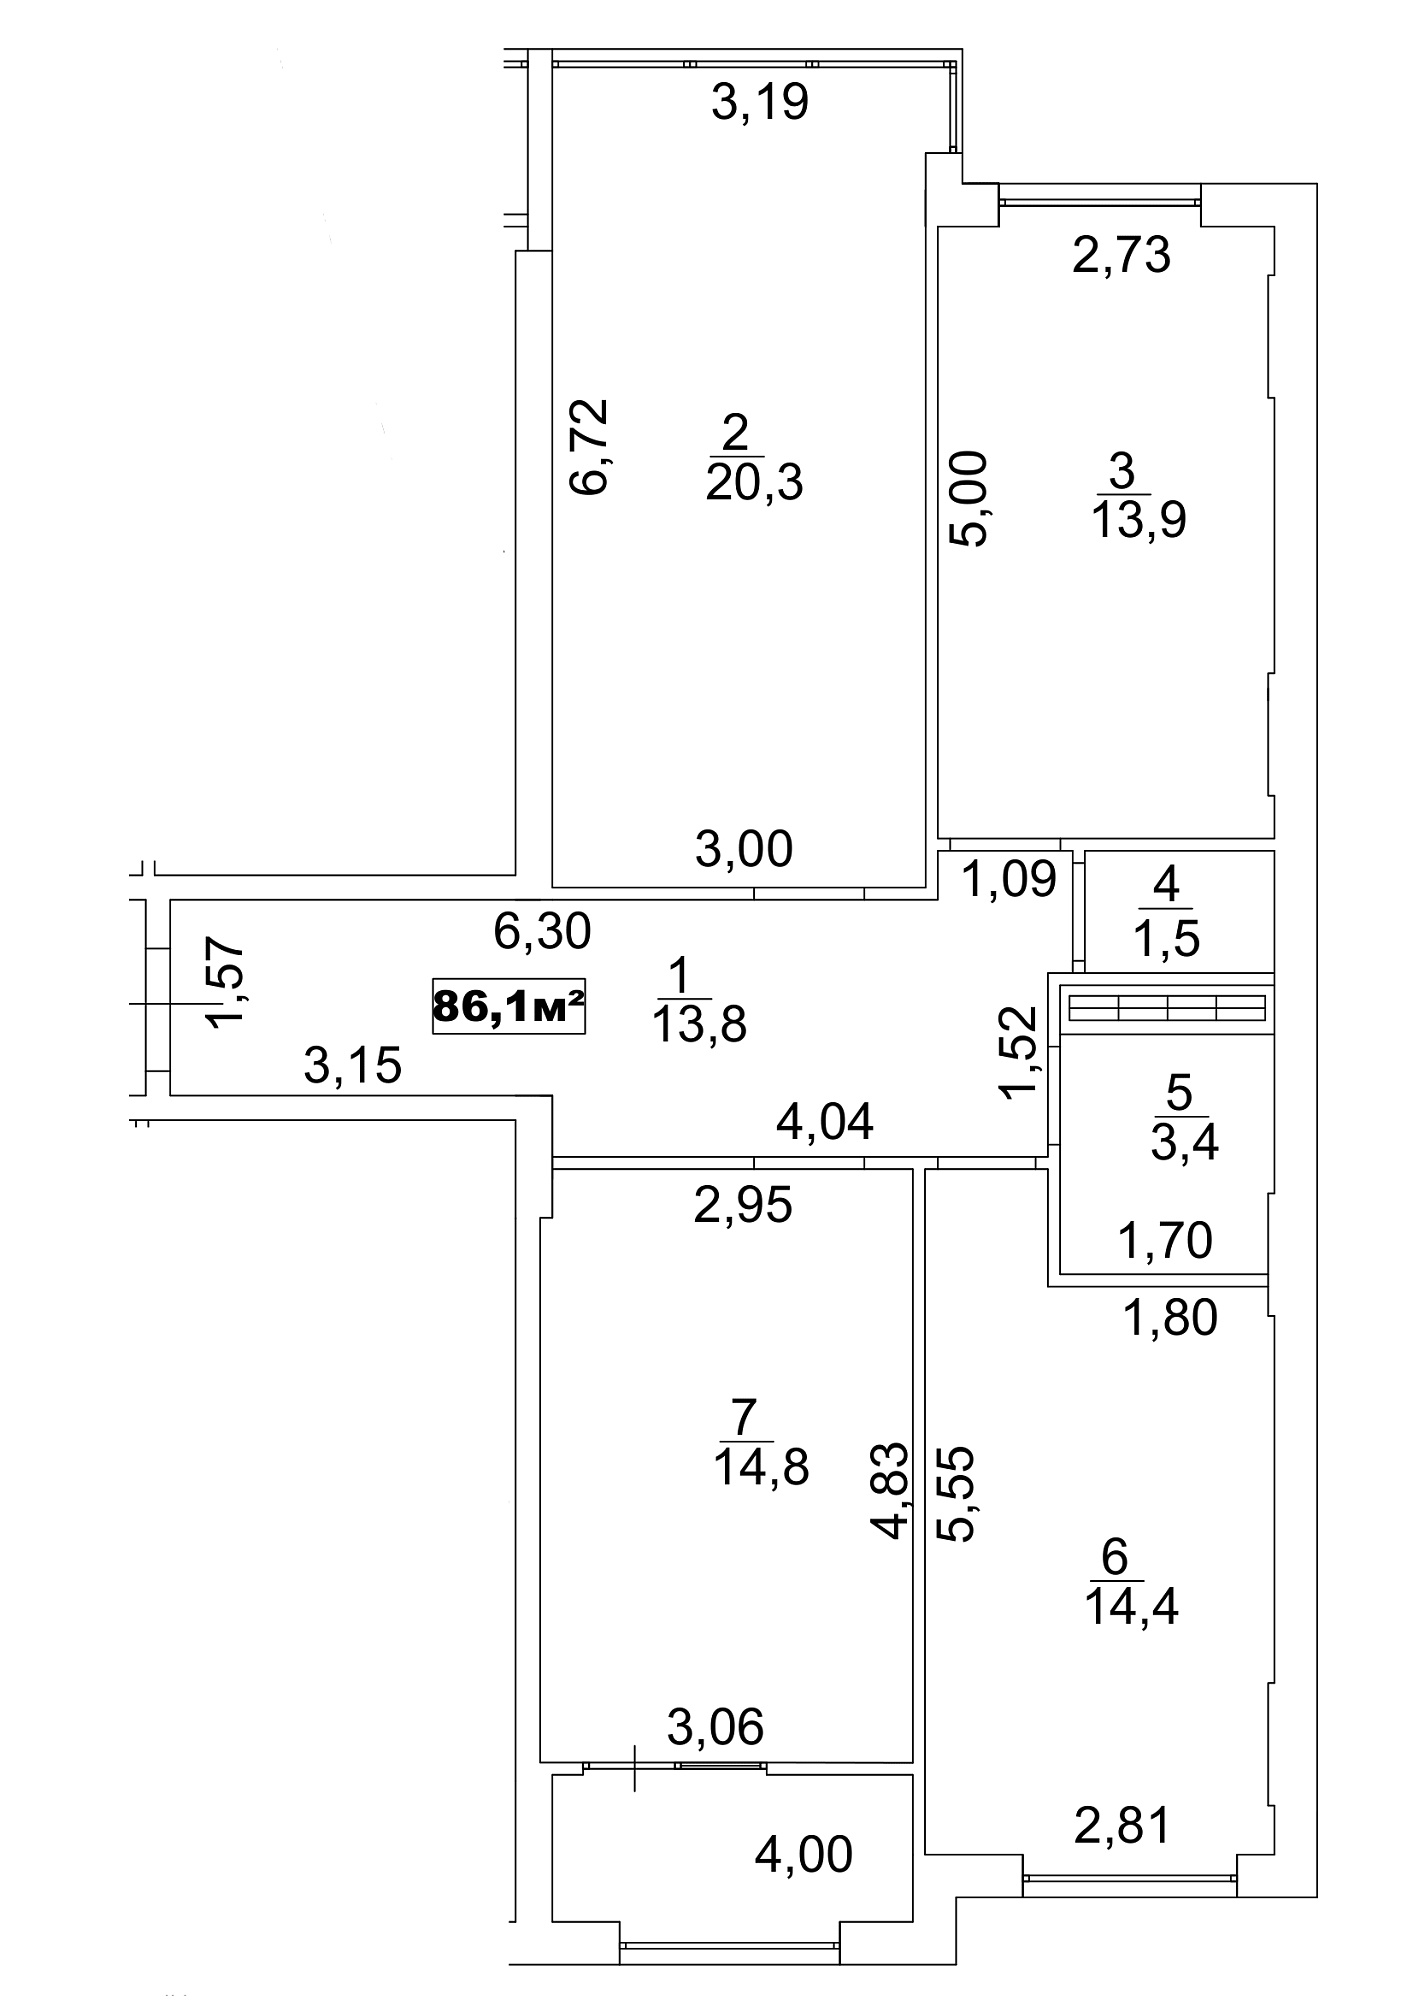 Planning 3-rm flats area 86.1m2, AB-13-02/00013.